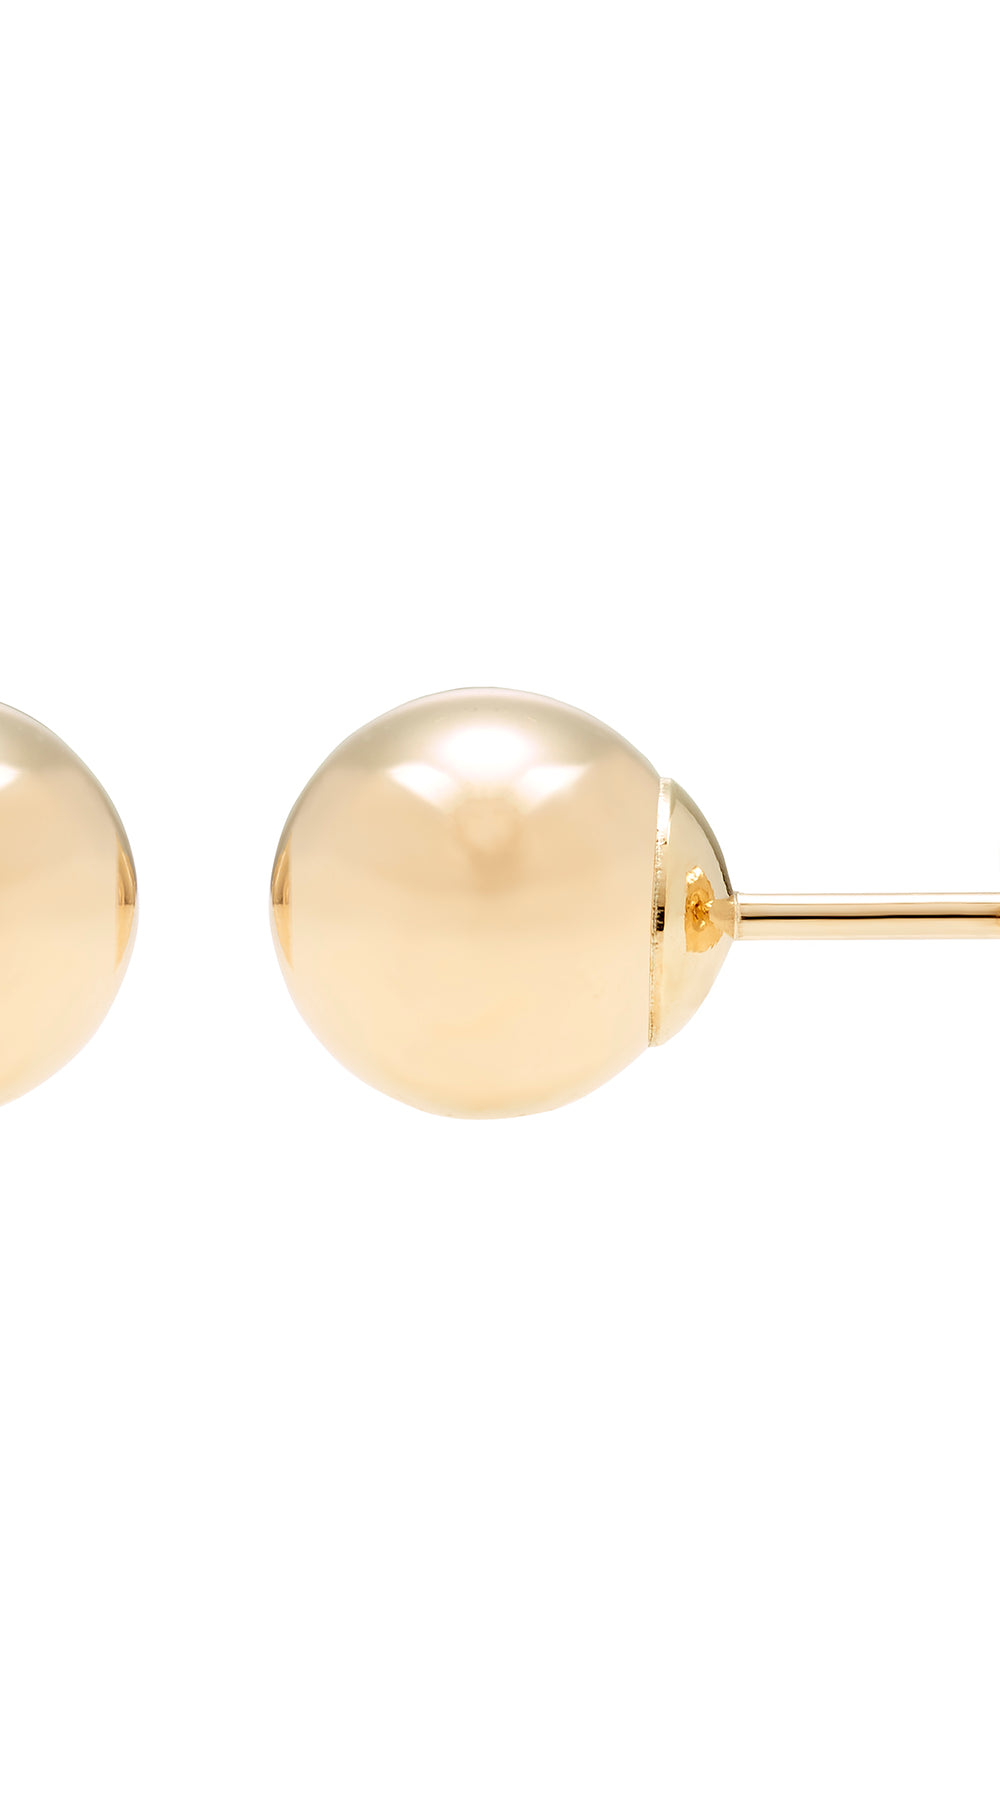 14K Yellow Gold Hollow Ball Stud Earrings ( Sizes 3MM-8MM)